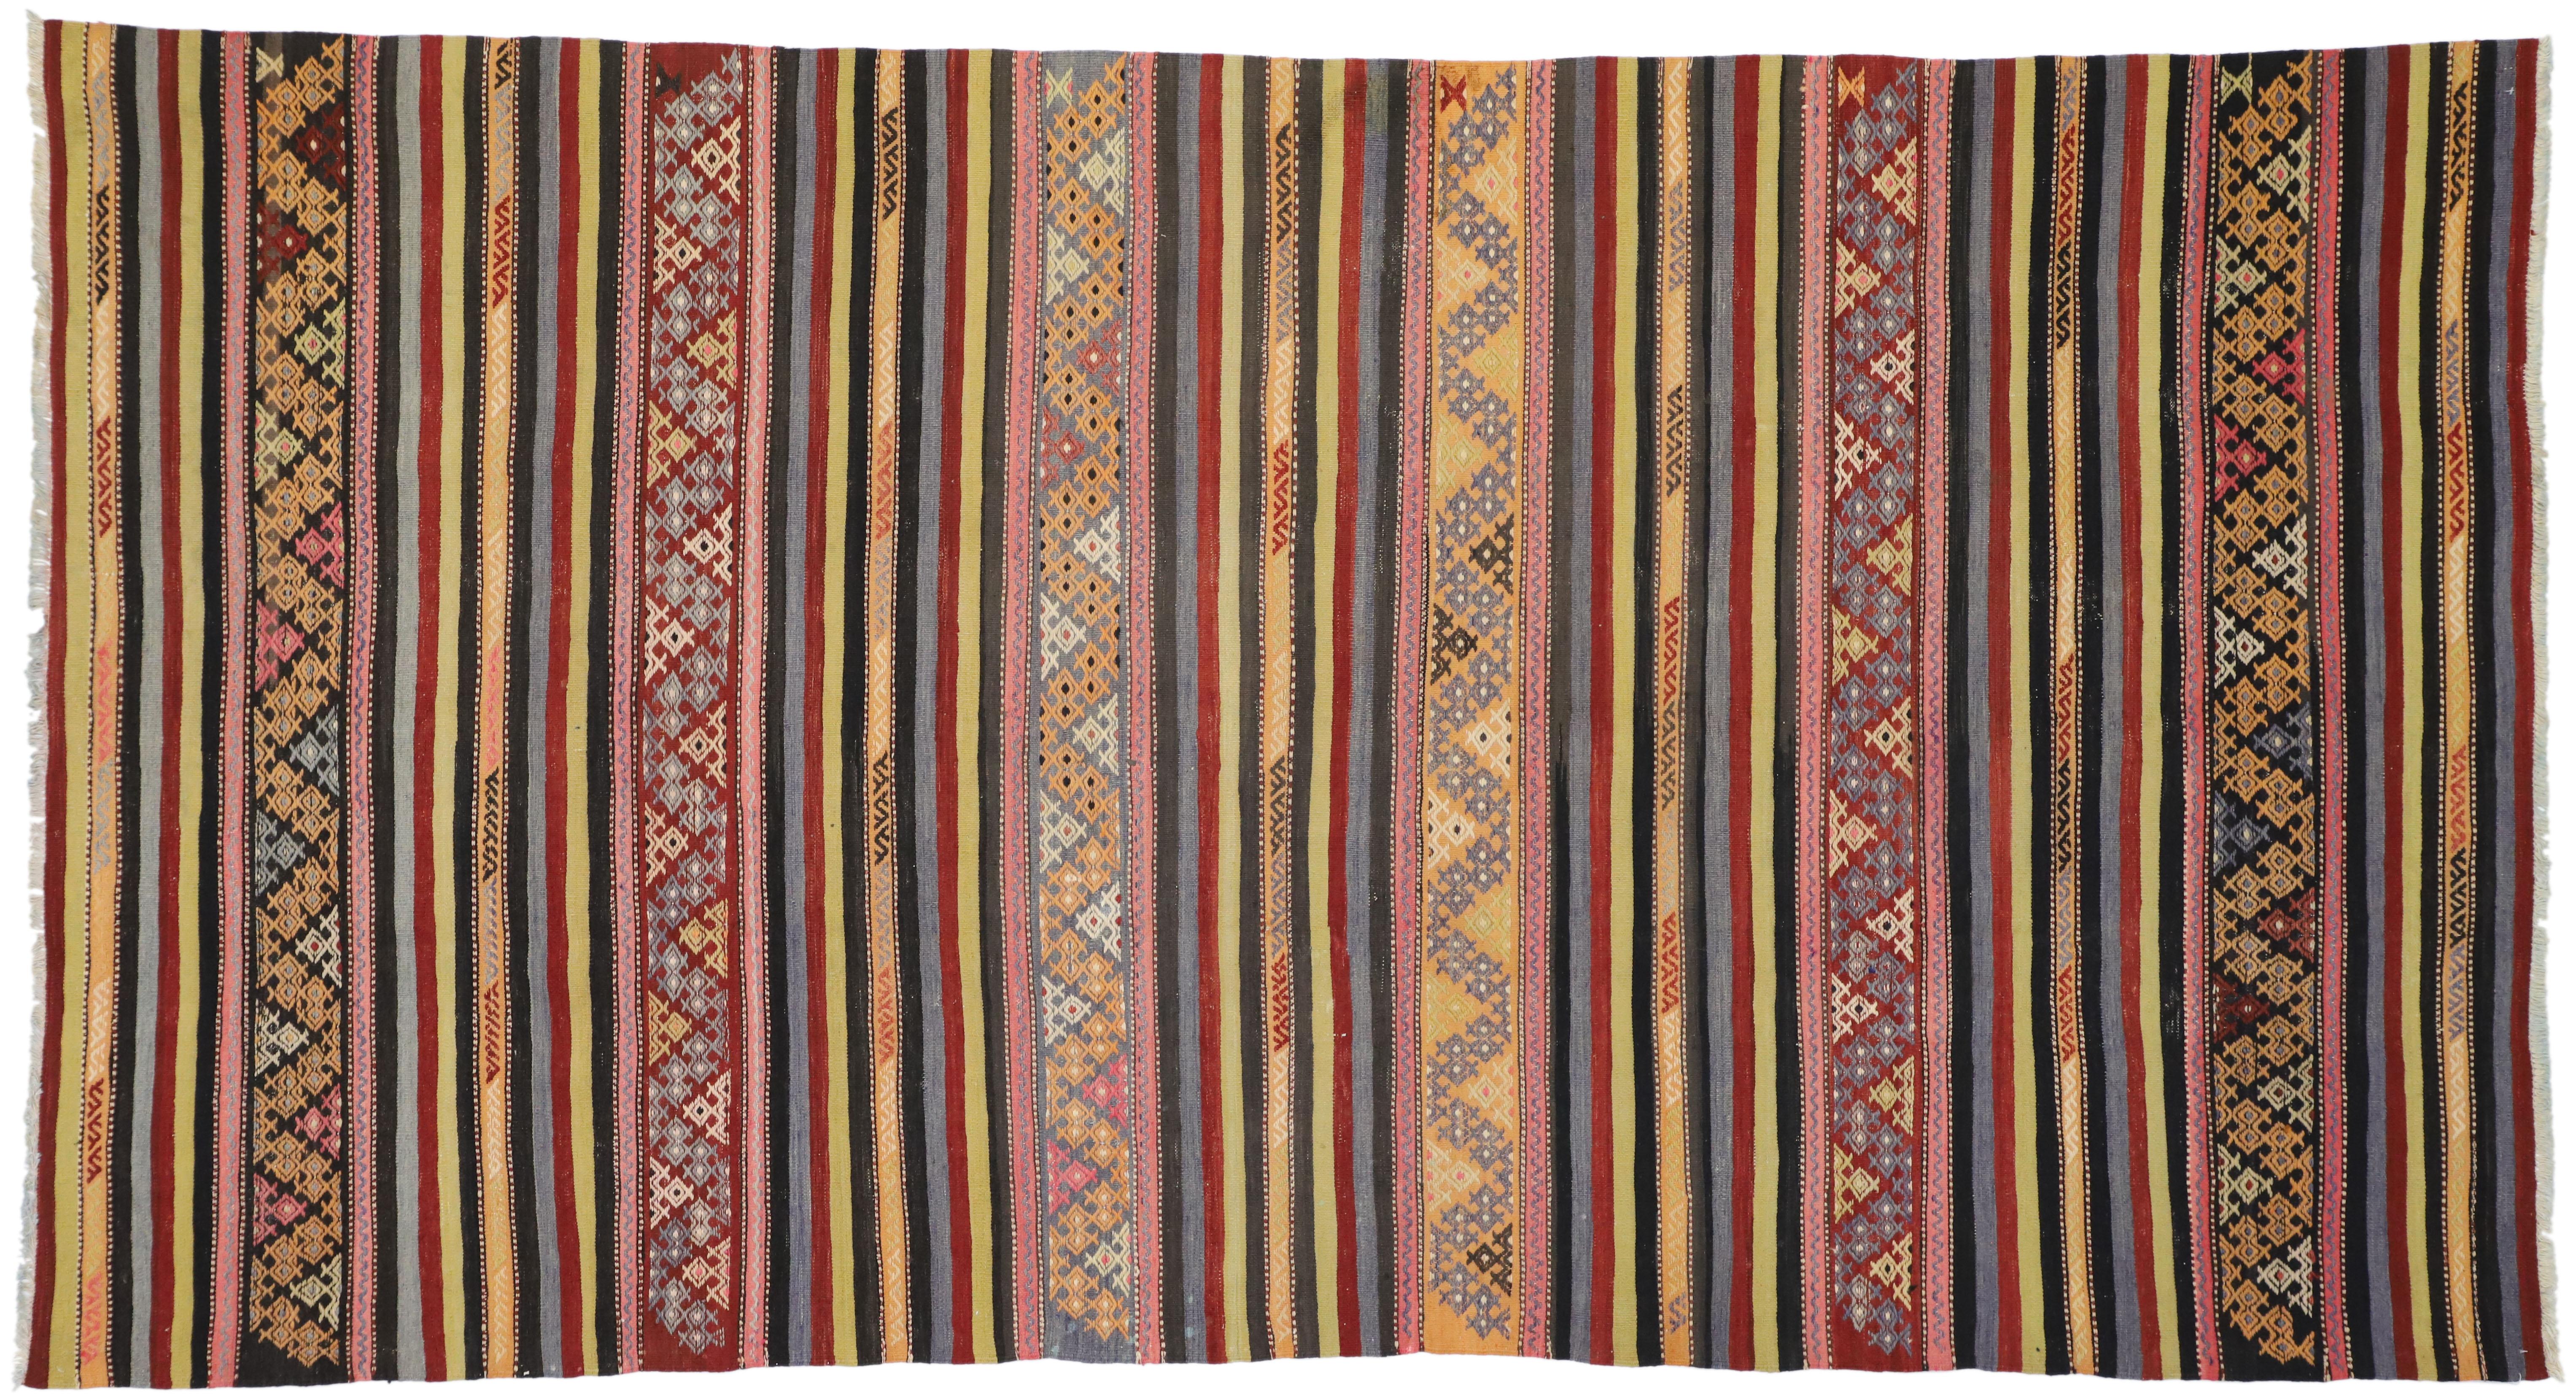 51347, vintage Turkish Striped Kilim rug with Tribal Bohemian style, flat-weave rug. Highlighting the finest trends in design, this handwoven wool vintage Turkish striped Kilim rug features a series of horizontal bands in vibrant colors adorned with